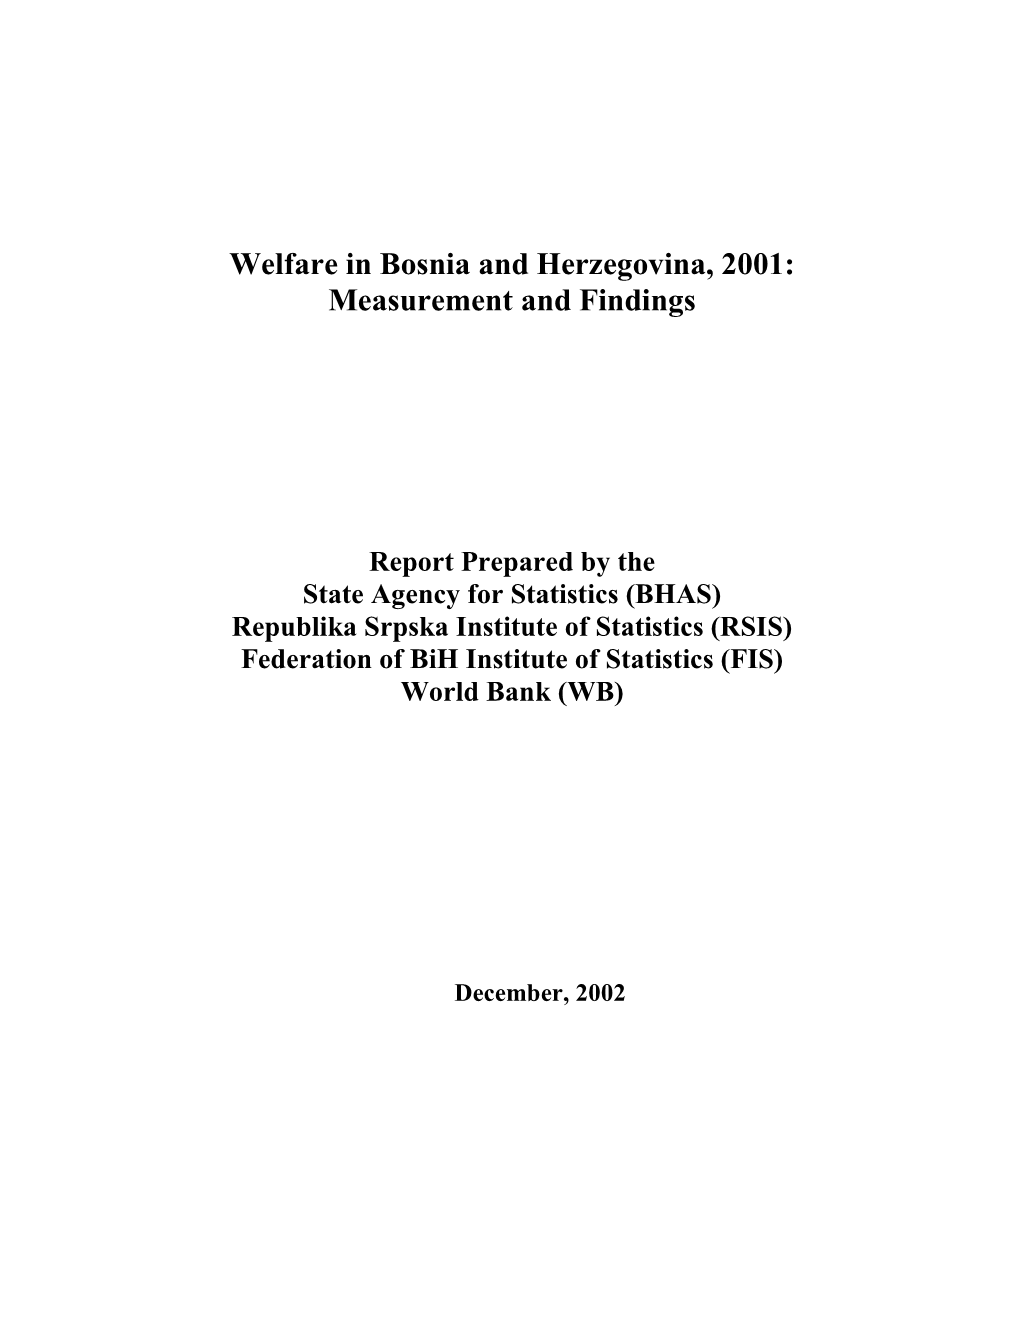 Welfare in Bosnia and Herzegovina, 2001: Measurement and Findings